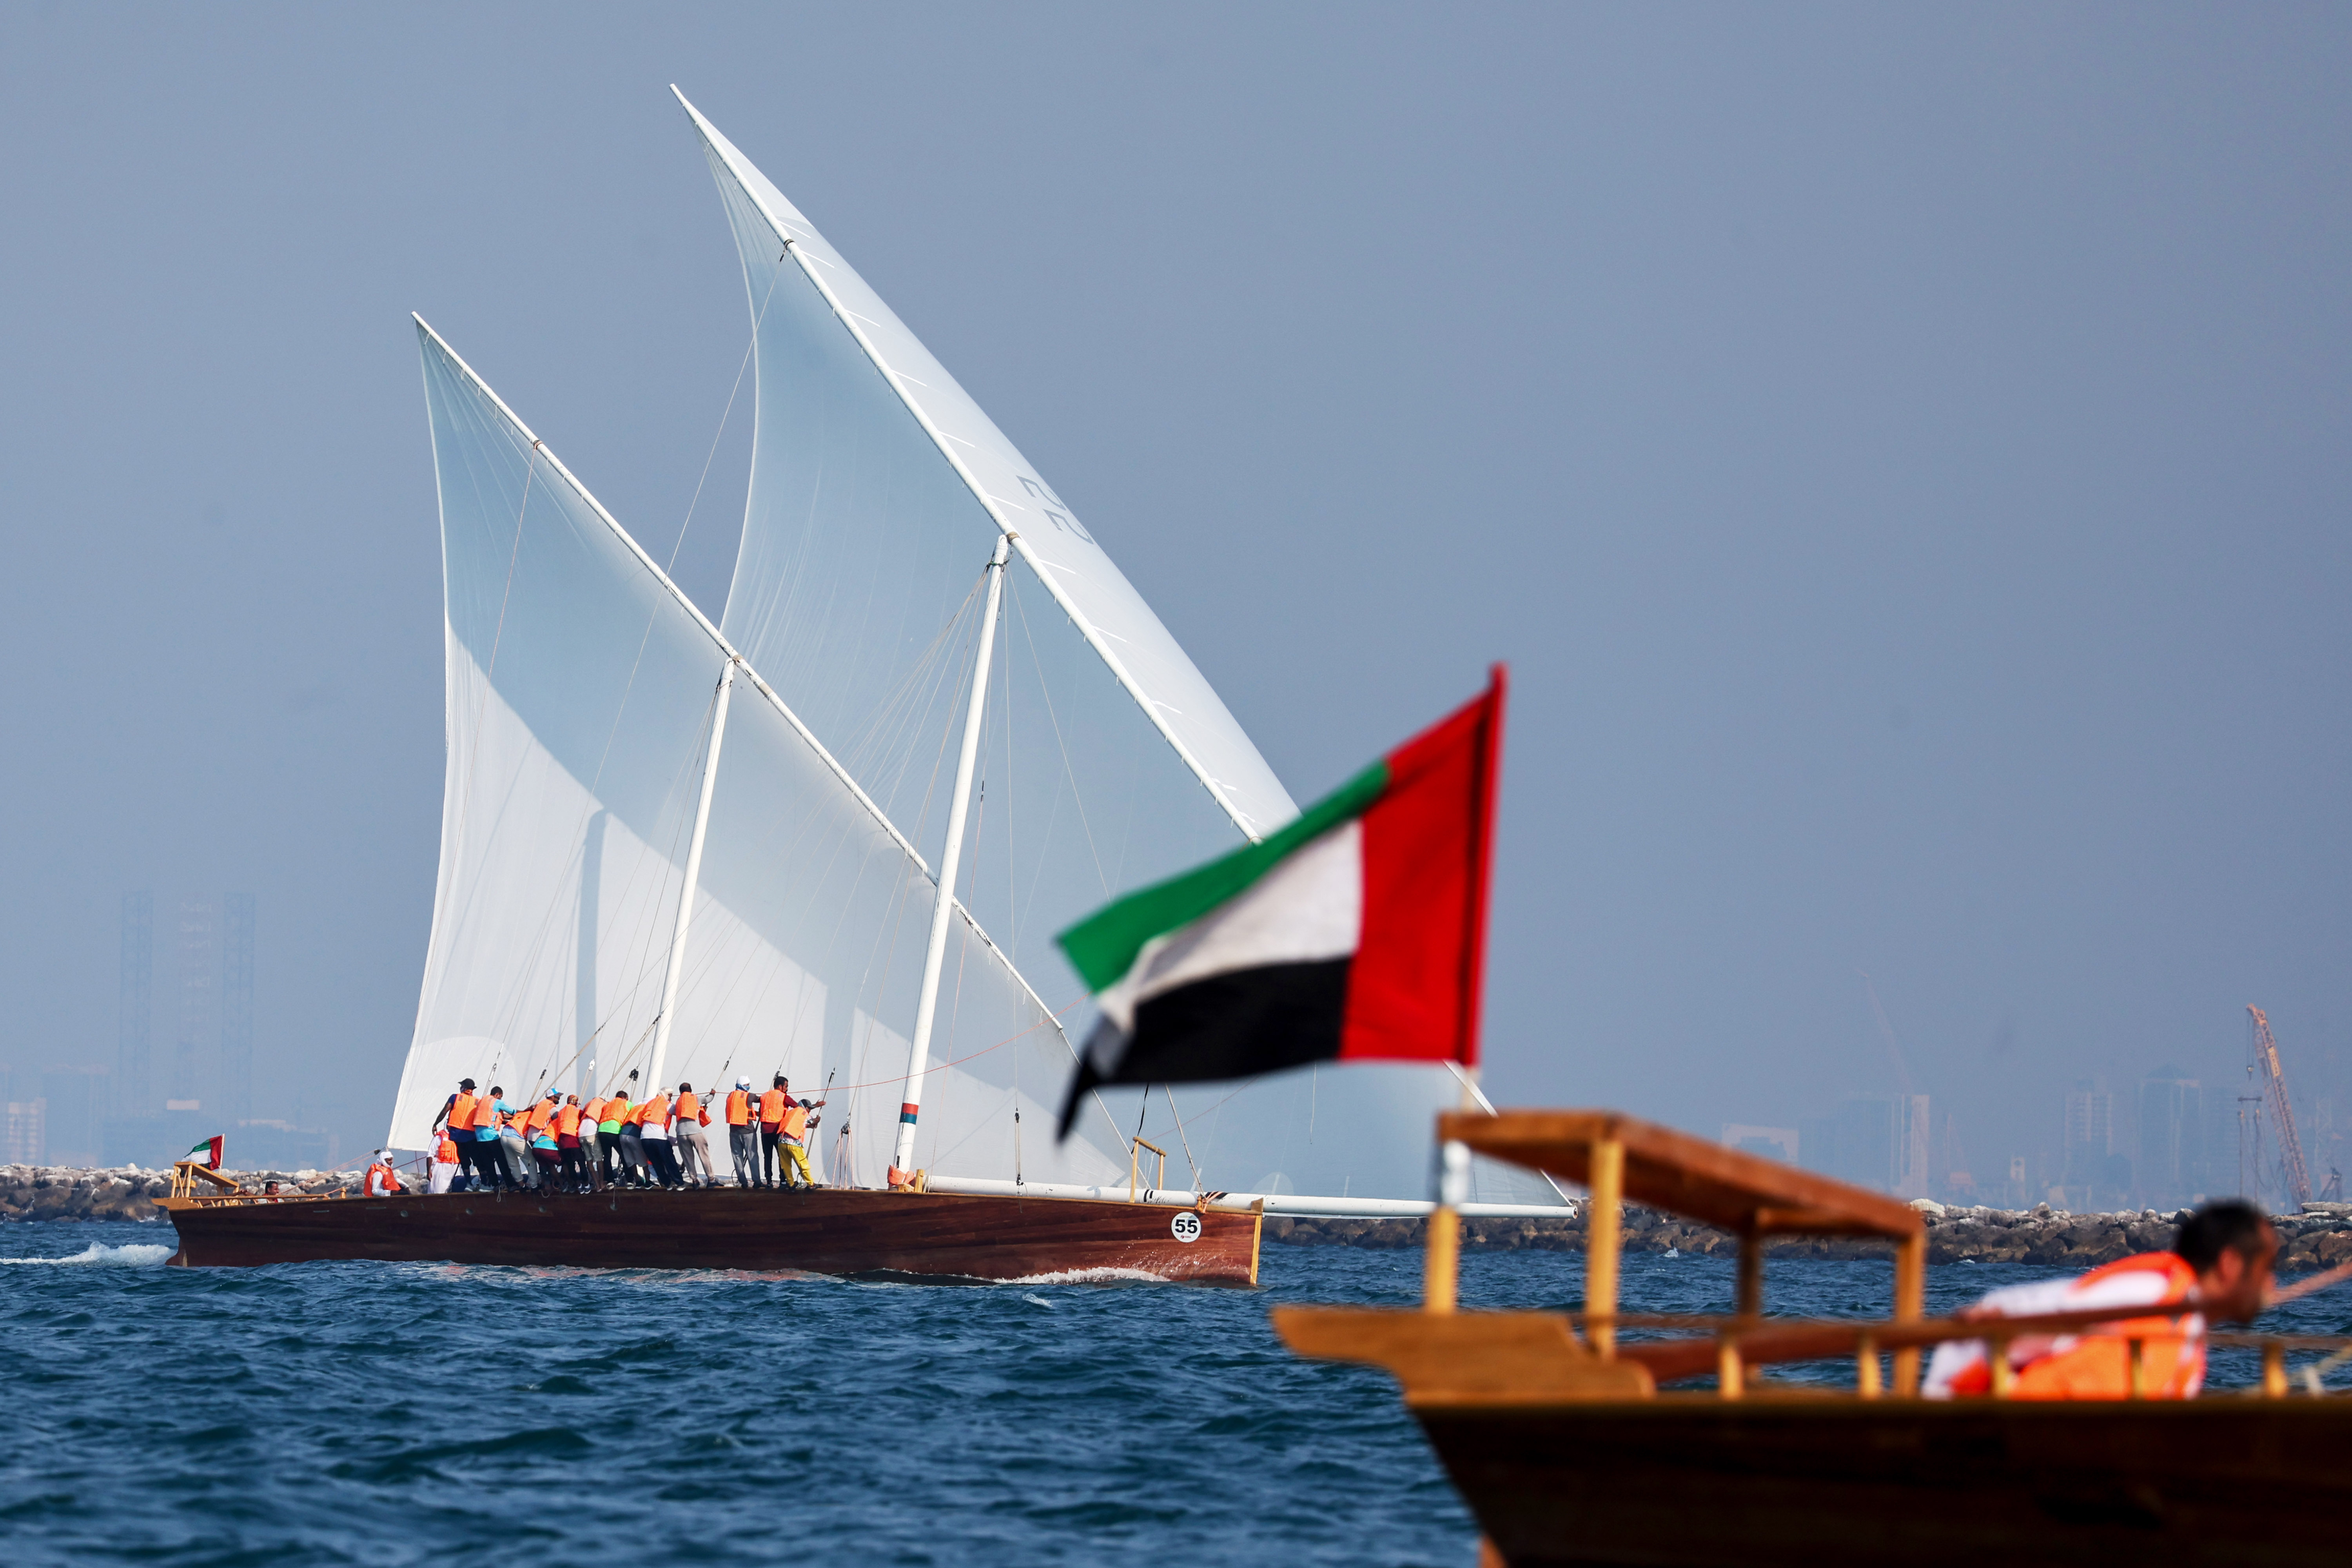 82 Boats Competing in the Dubai Traditional Dhow Sailing Race (60ft) Today